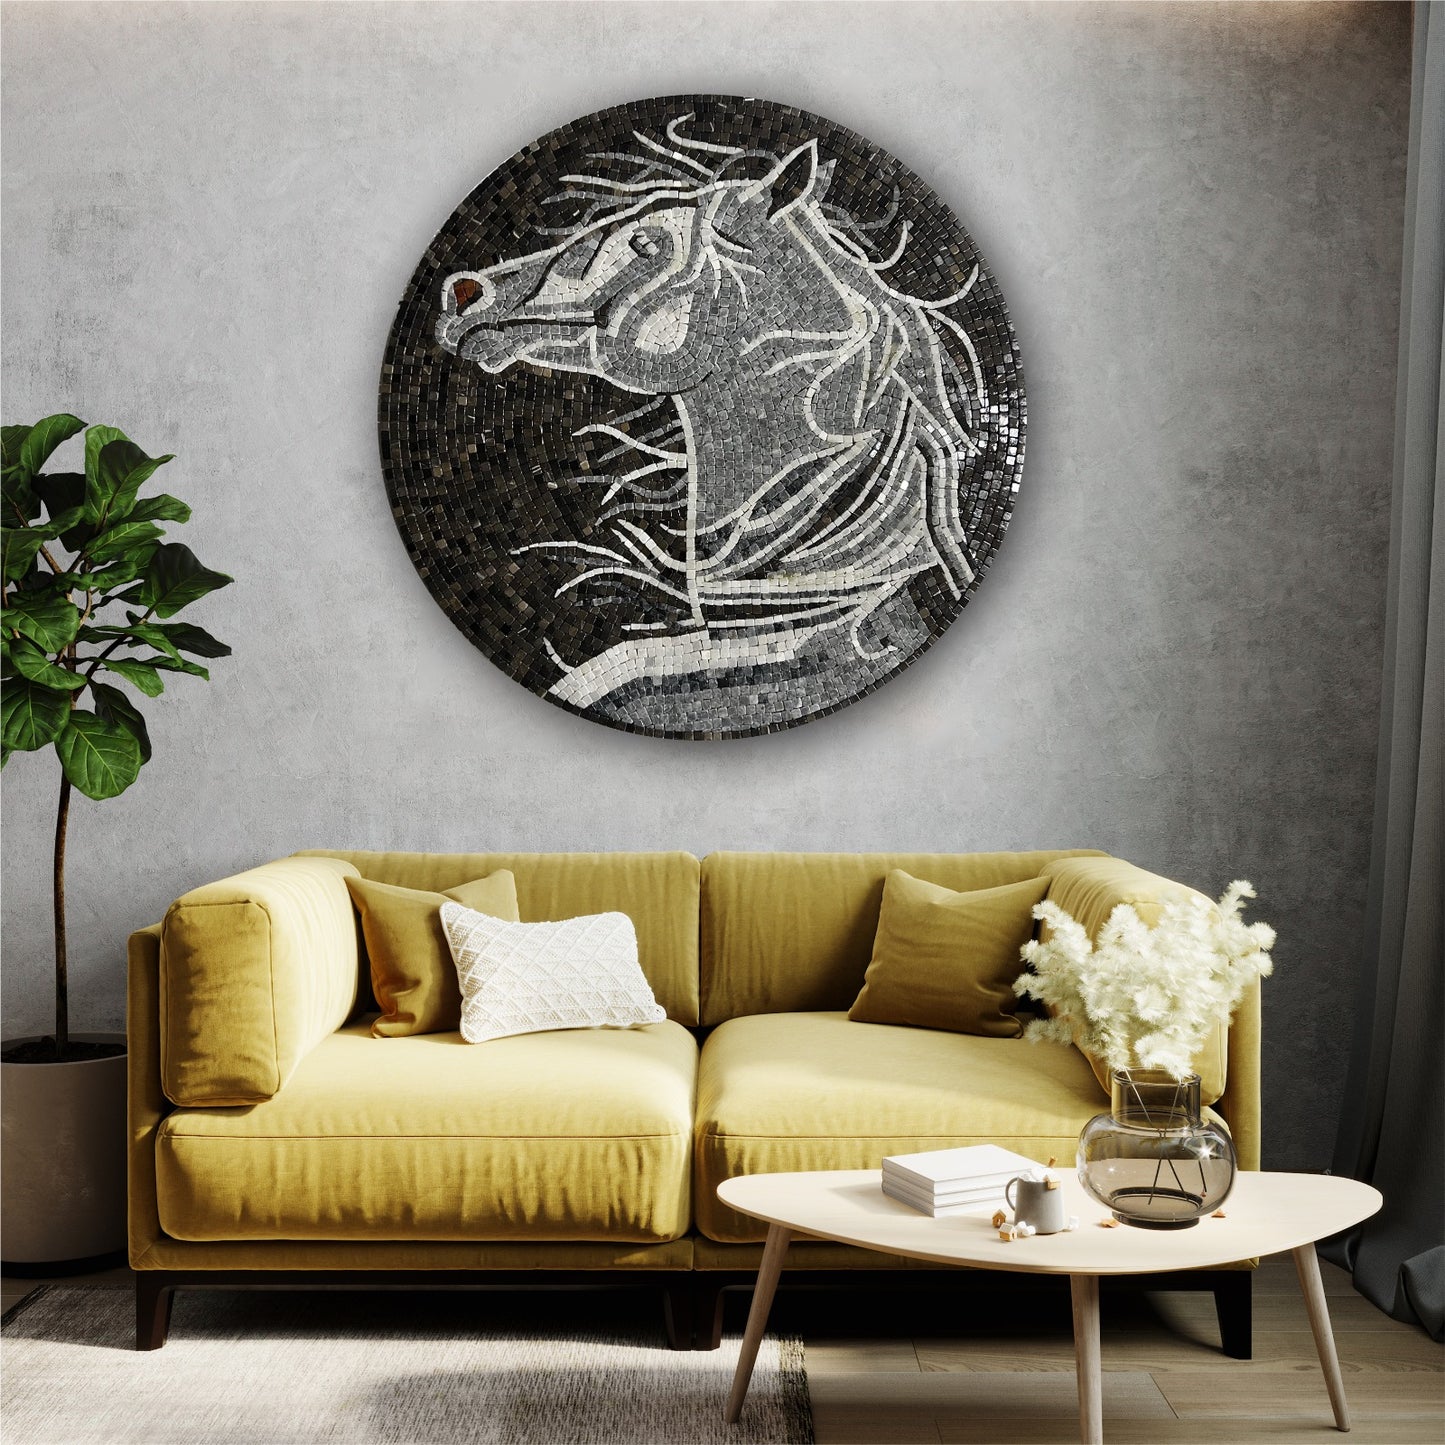 SIGNATURE ANDALUSIAN HORSE - Mosaic By Qureshi's